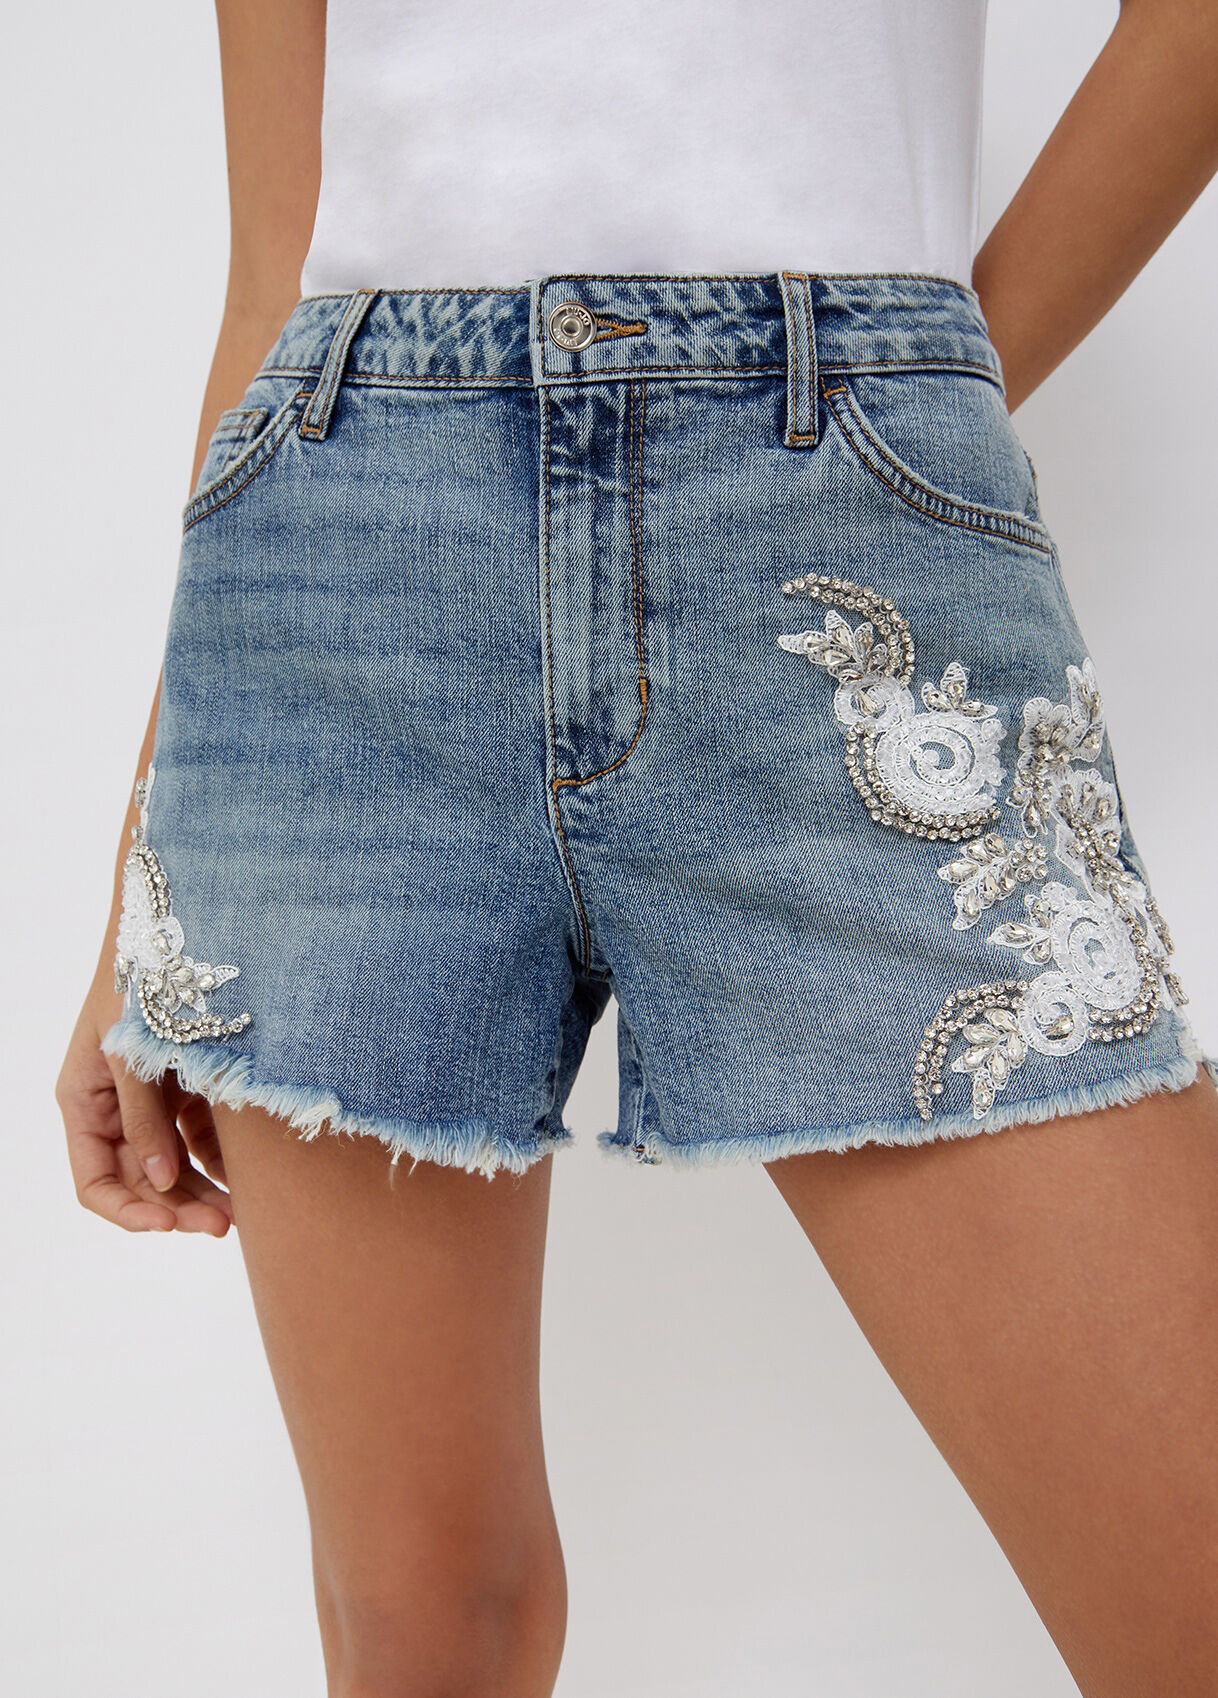 Denim shorts with embroidered jewels